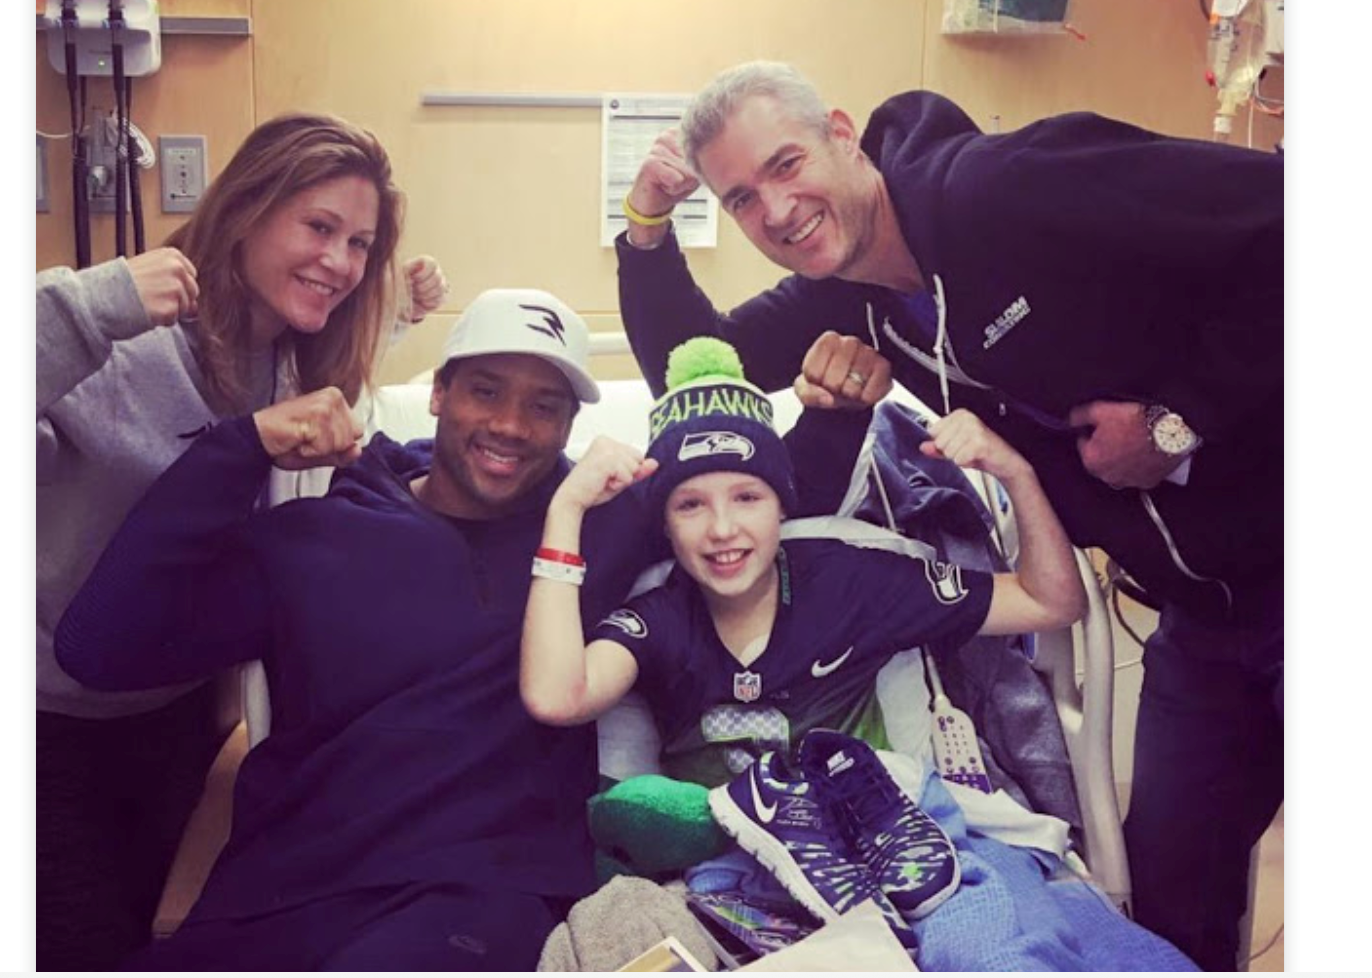 While in the hospital, Avery received a visit from Seahawks quarterback Russell Wilson.